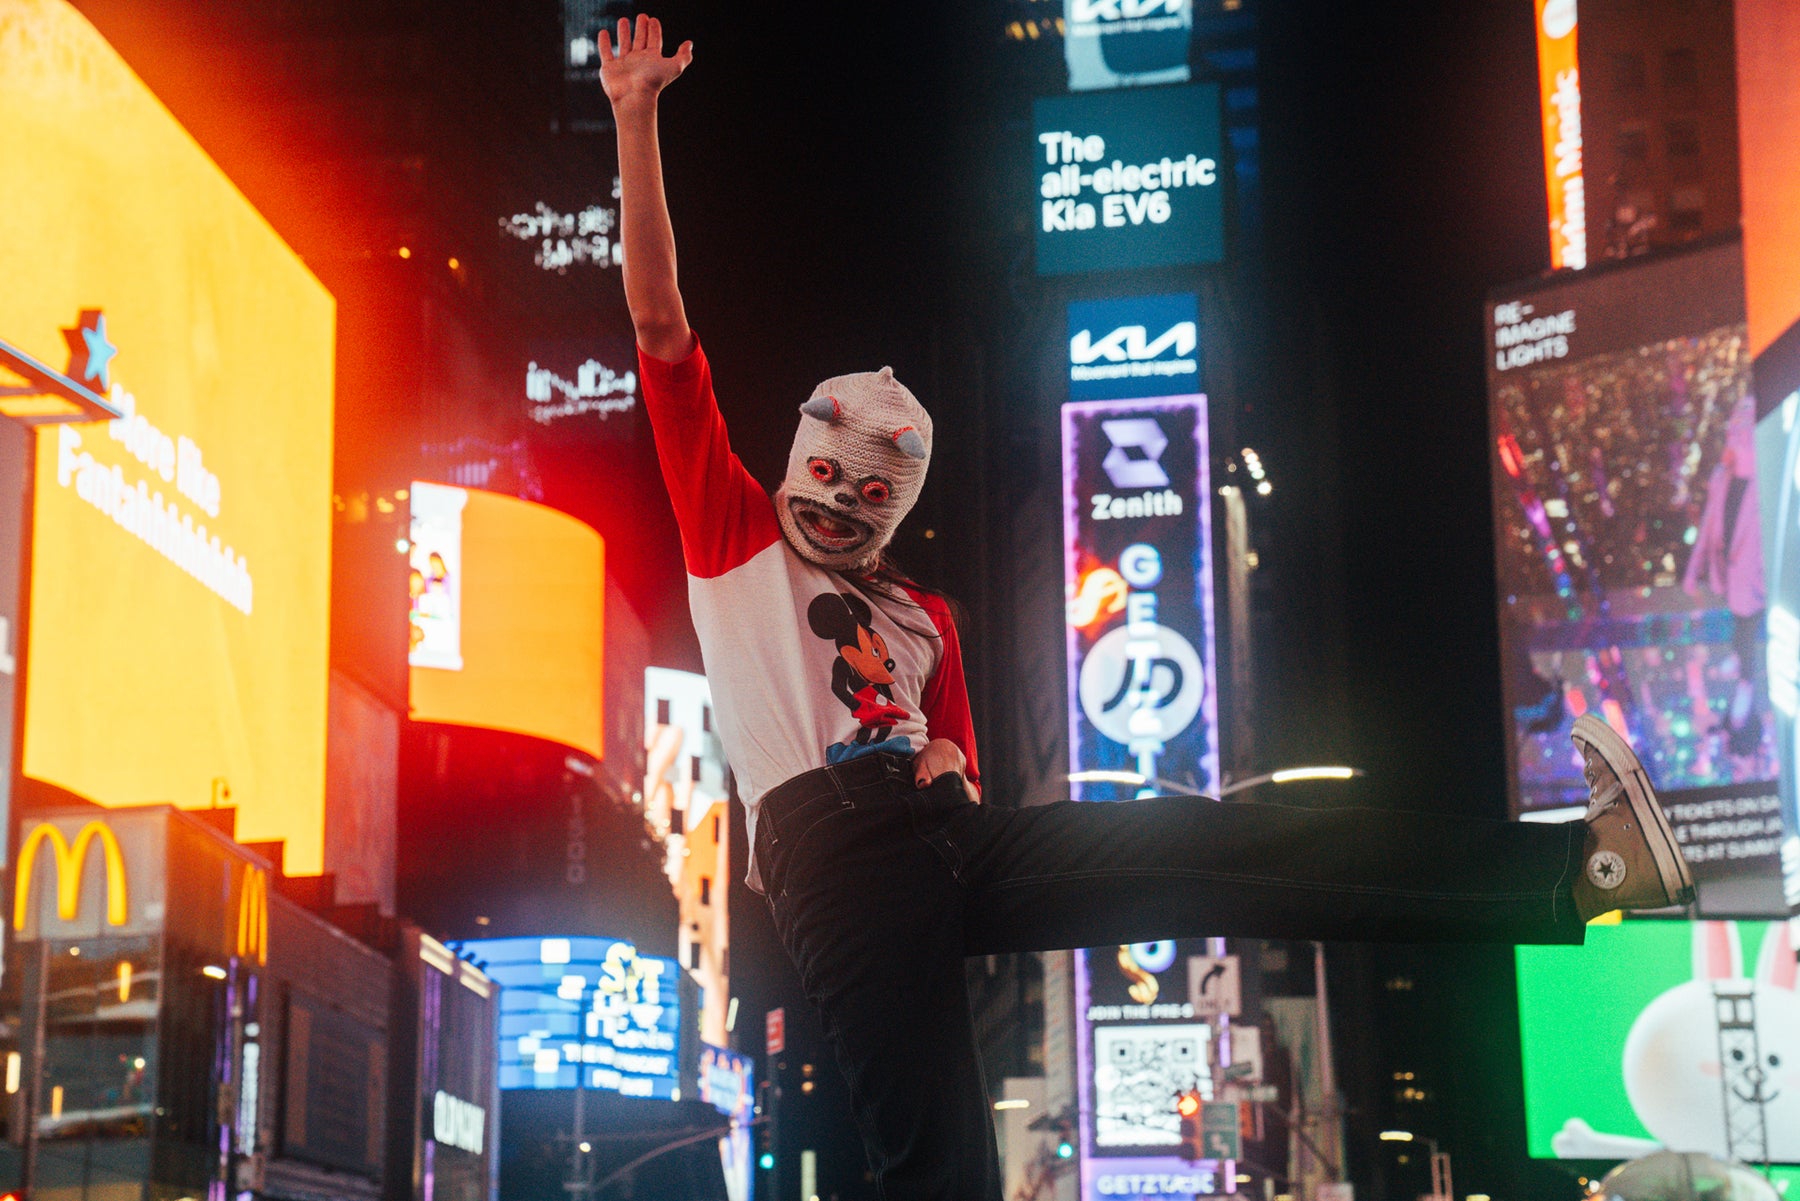 katrina in vejigante mask and mickey mouse t-shirt in times square with blurred neon signage in background.